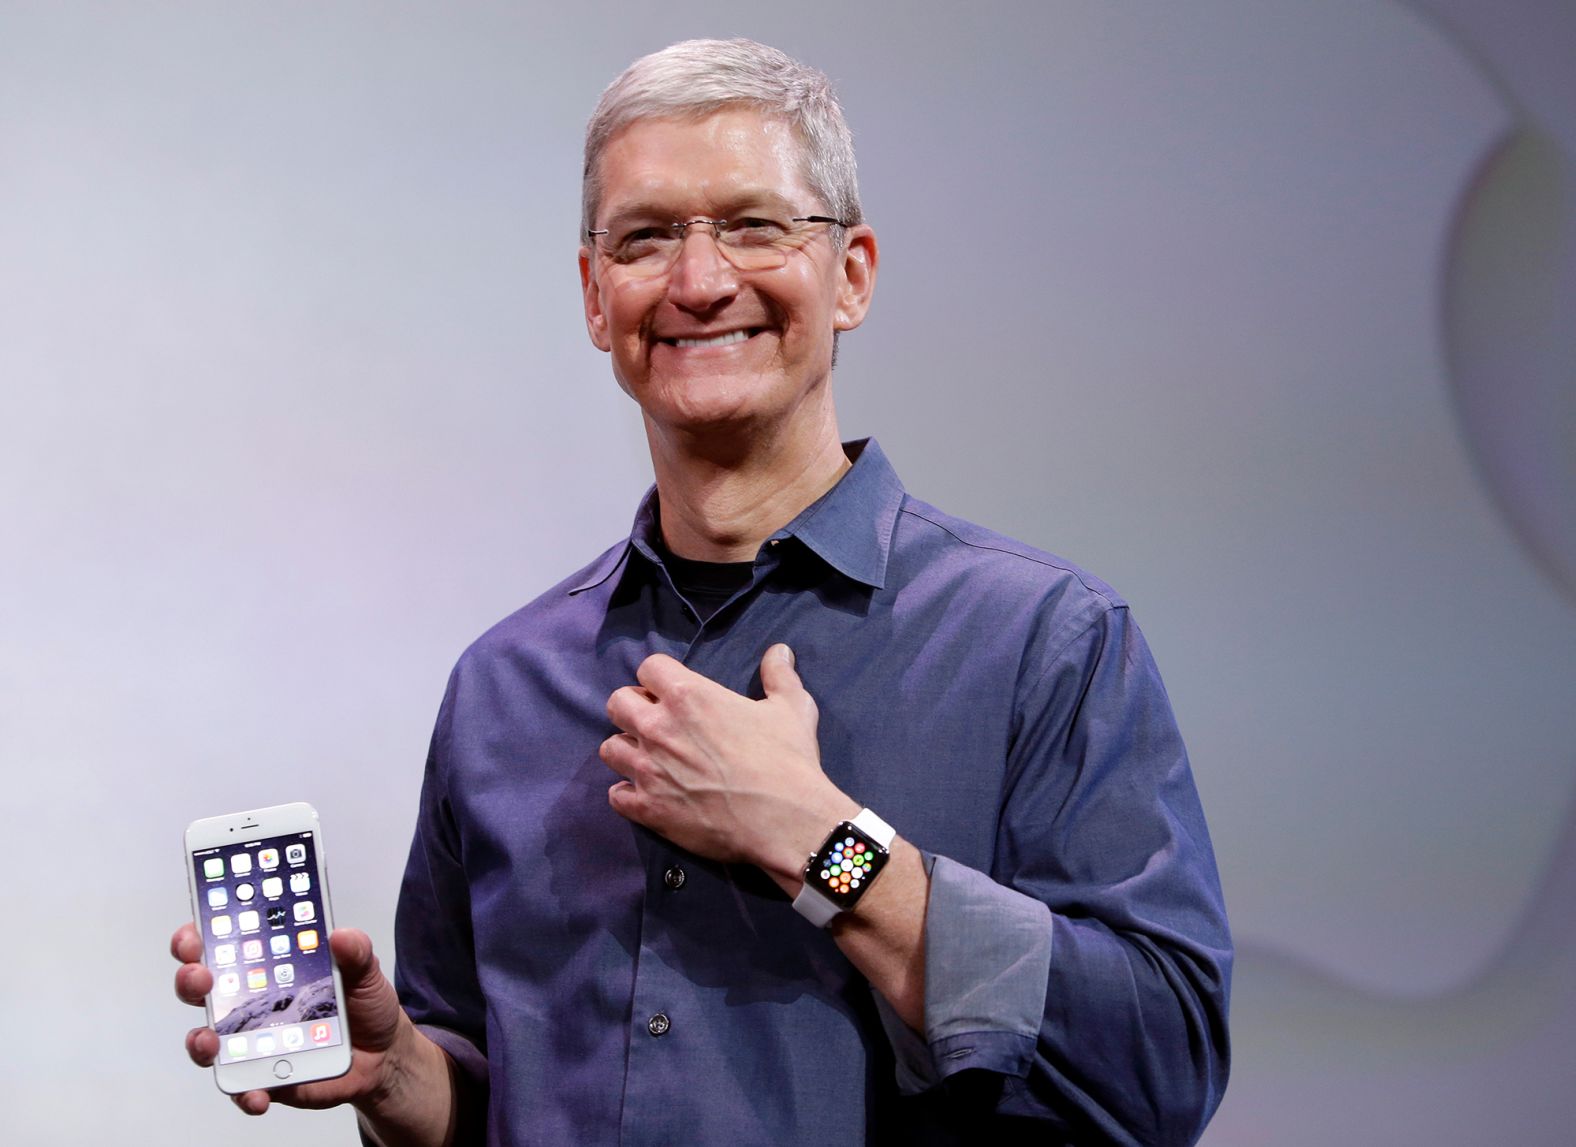 Cook, holding an iPhone 6 Plus and wearing an Apple Watch, discusses the new products during an event in Cupertino in September 2014.